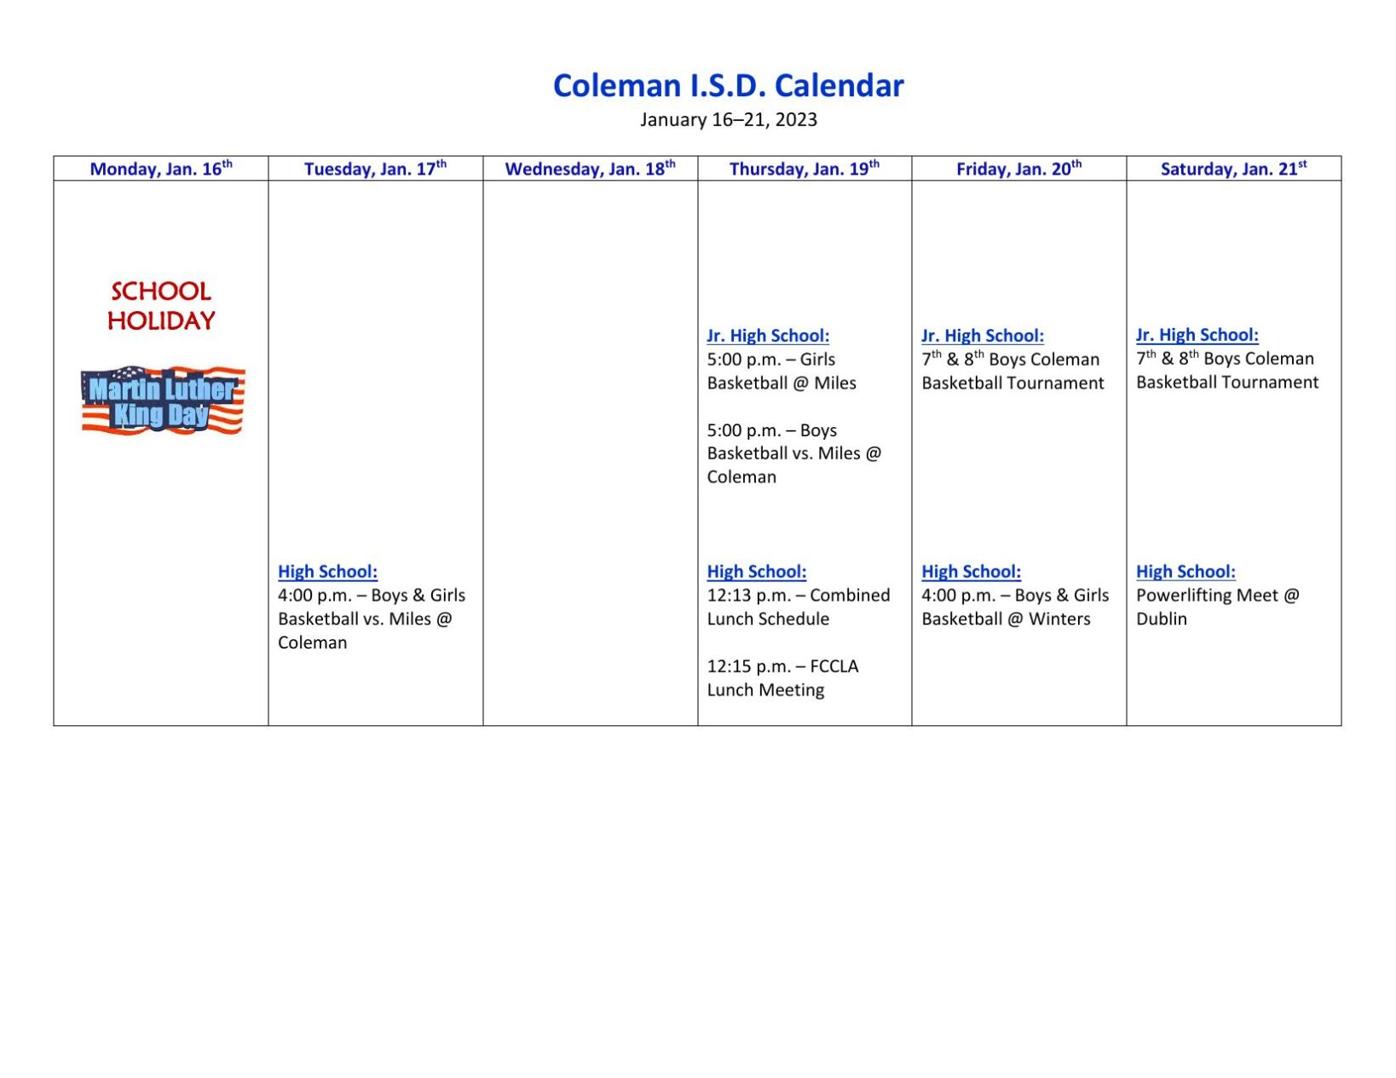 Coleman ISD Calendar for This Week News